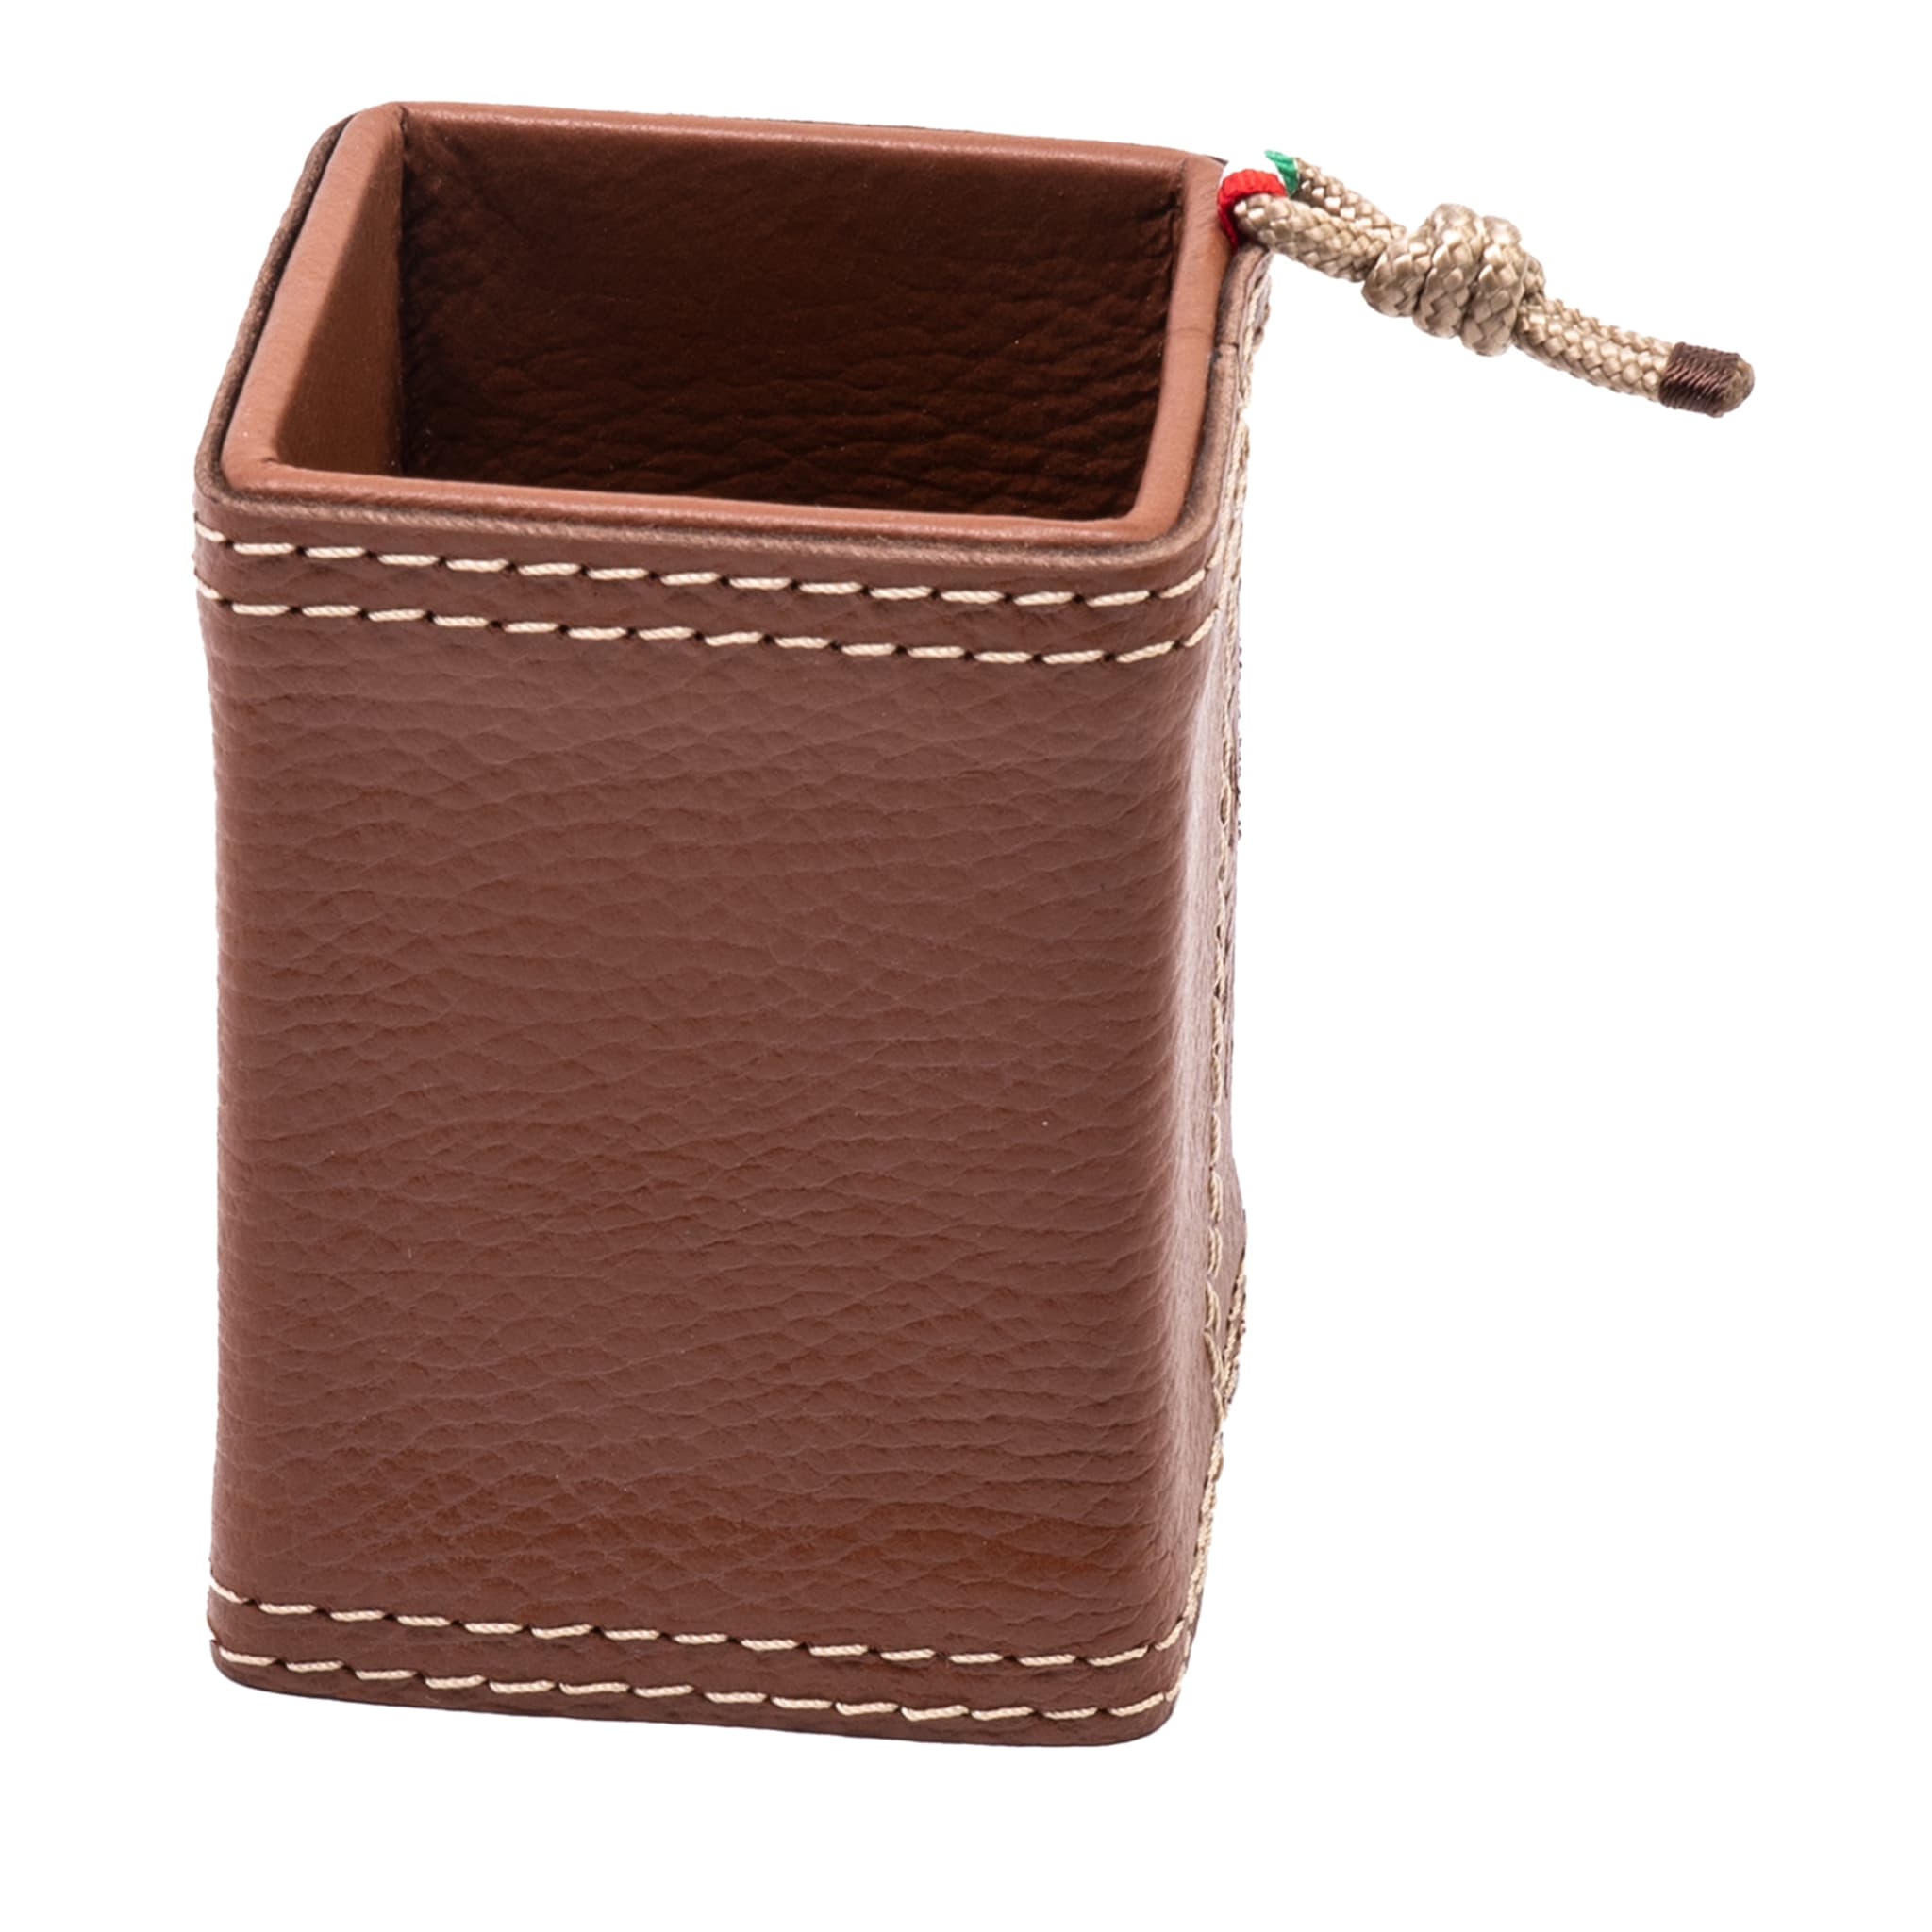 Beige Eco-Leather Pen Holder with Rope Insert - Main view